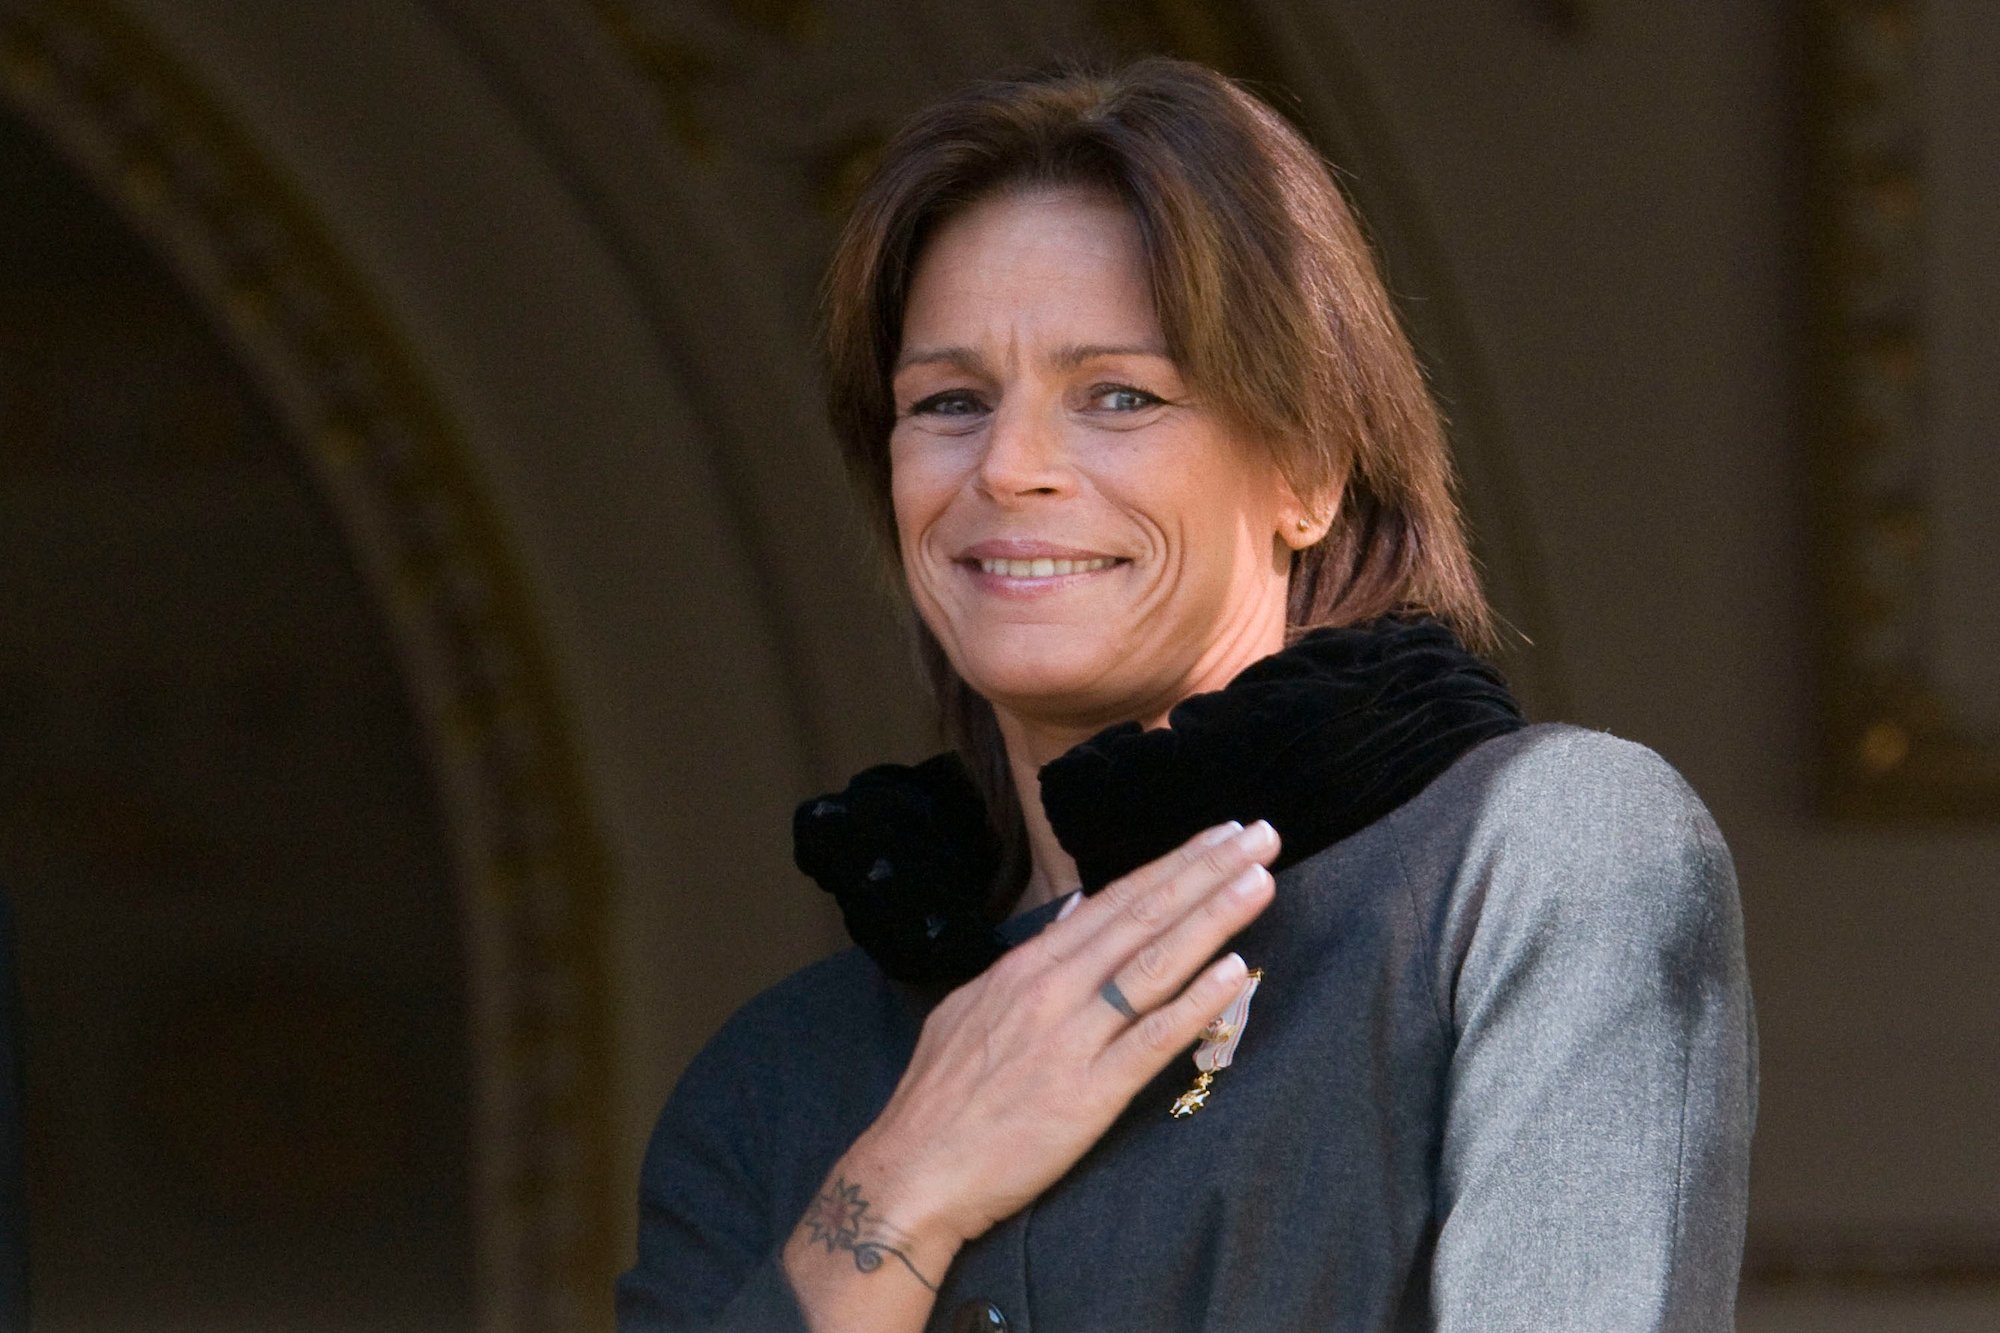 Princess Stephanie of Monaco, smiling, touching her shoulder